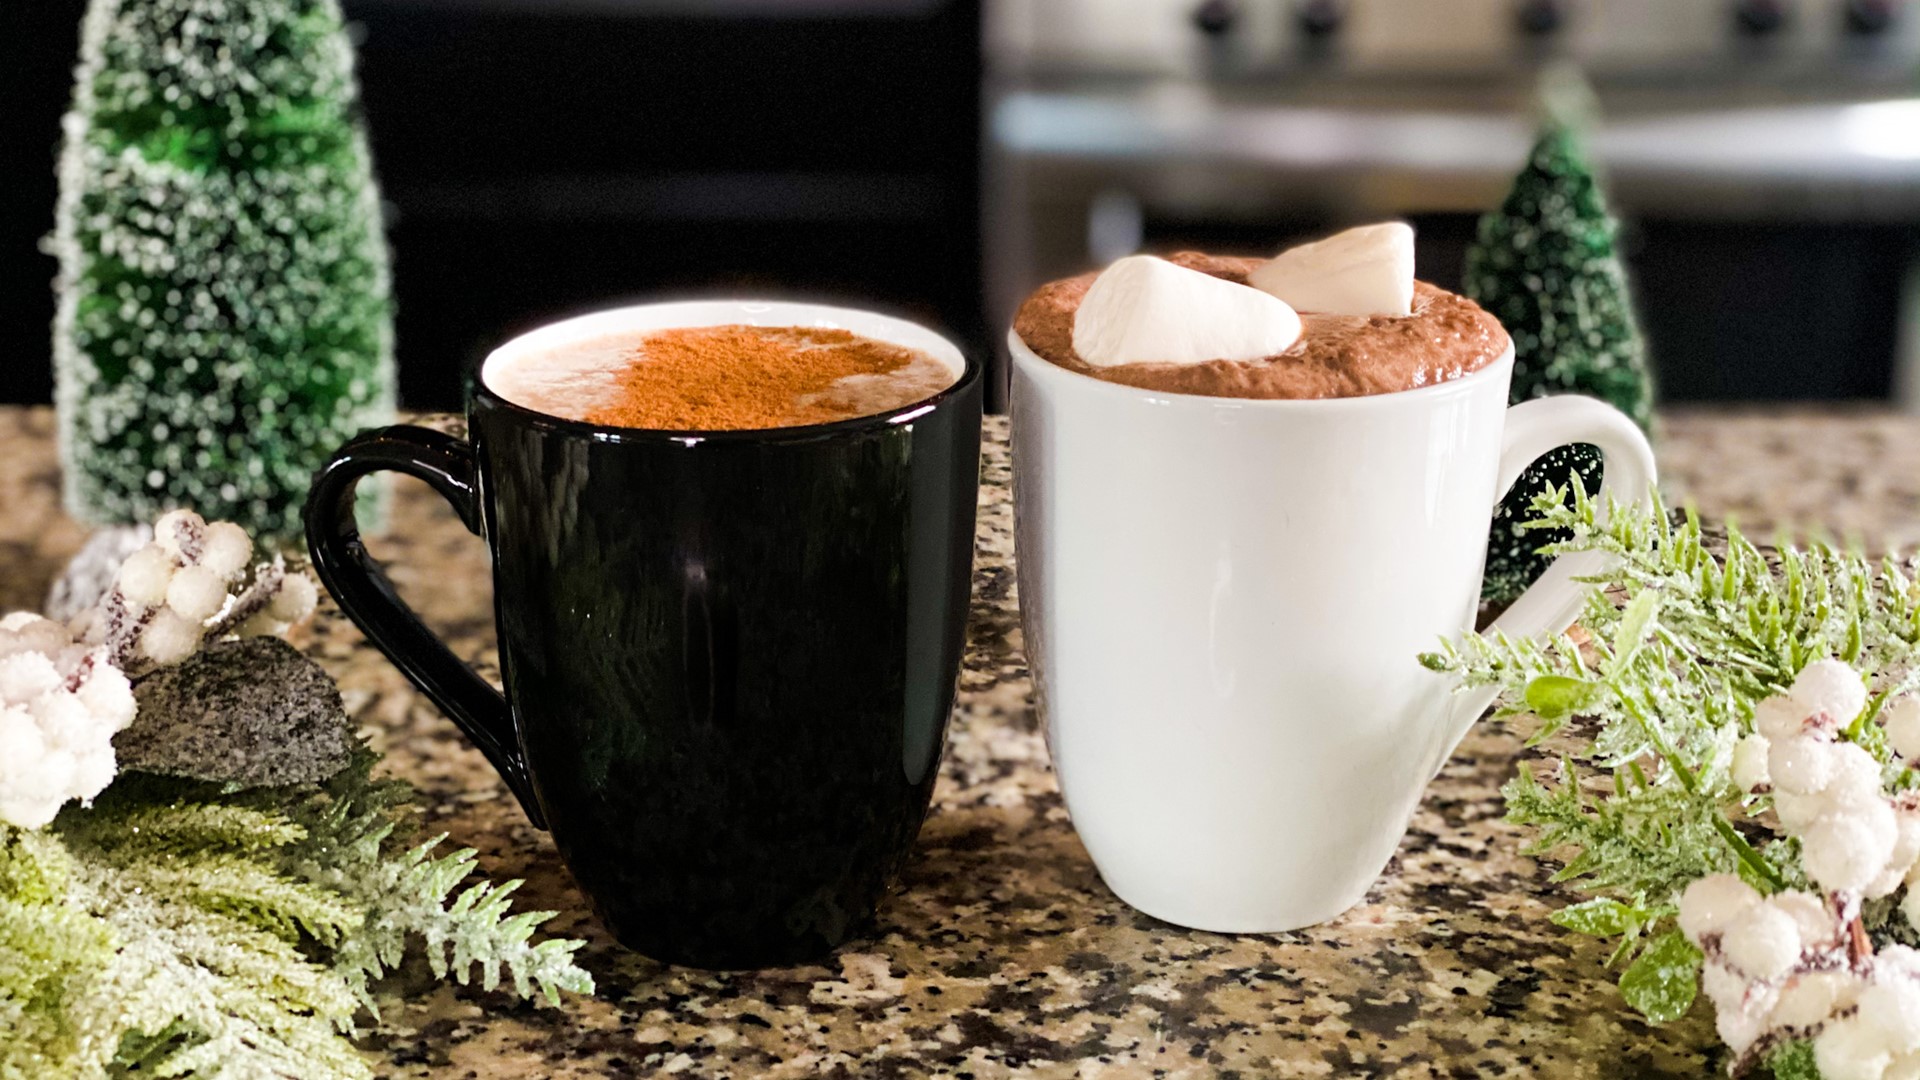 Can't go wrong with holiday staples like hot chocolate and eggnog. And there's no reason to feel bad about them with these healthier versions.